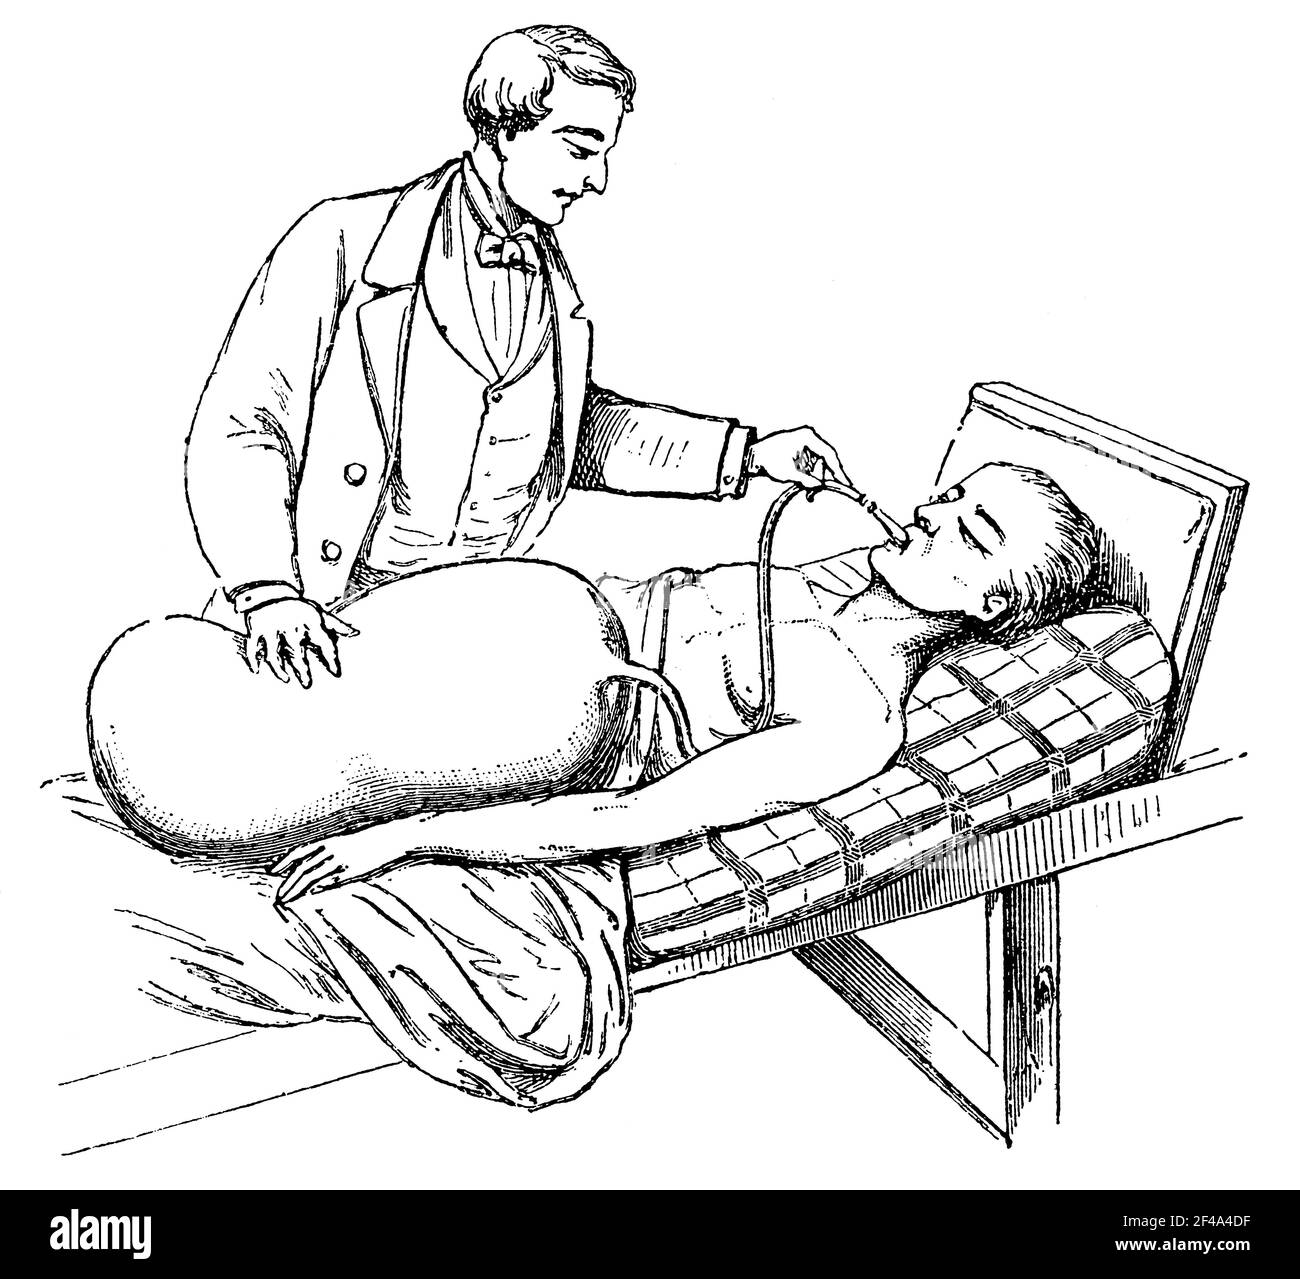 Induction of artificial respiration in the case of attacks of suffocation. Illustration of the 19th century. Germany. White background. Stock Photo